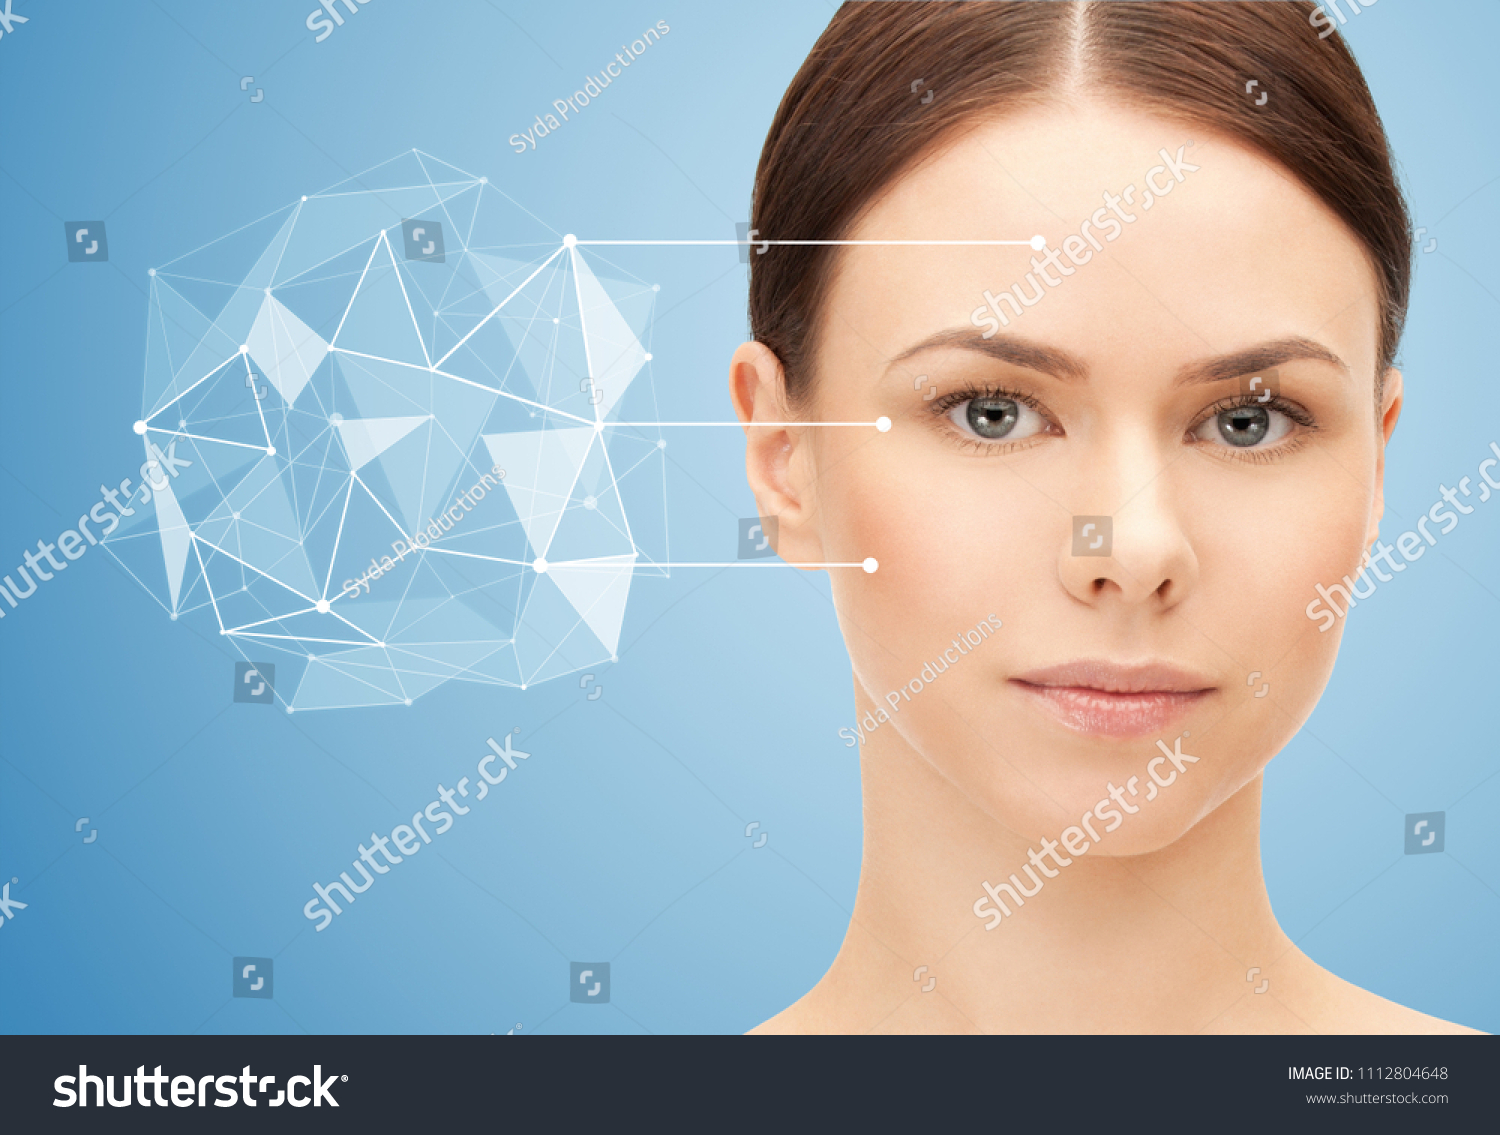 beauty, science and future technology concept - portrait of beautiful woman with low poly shape projection pointing to face over blue background #1112804648